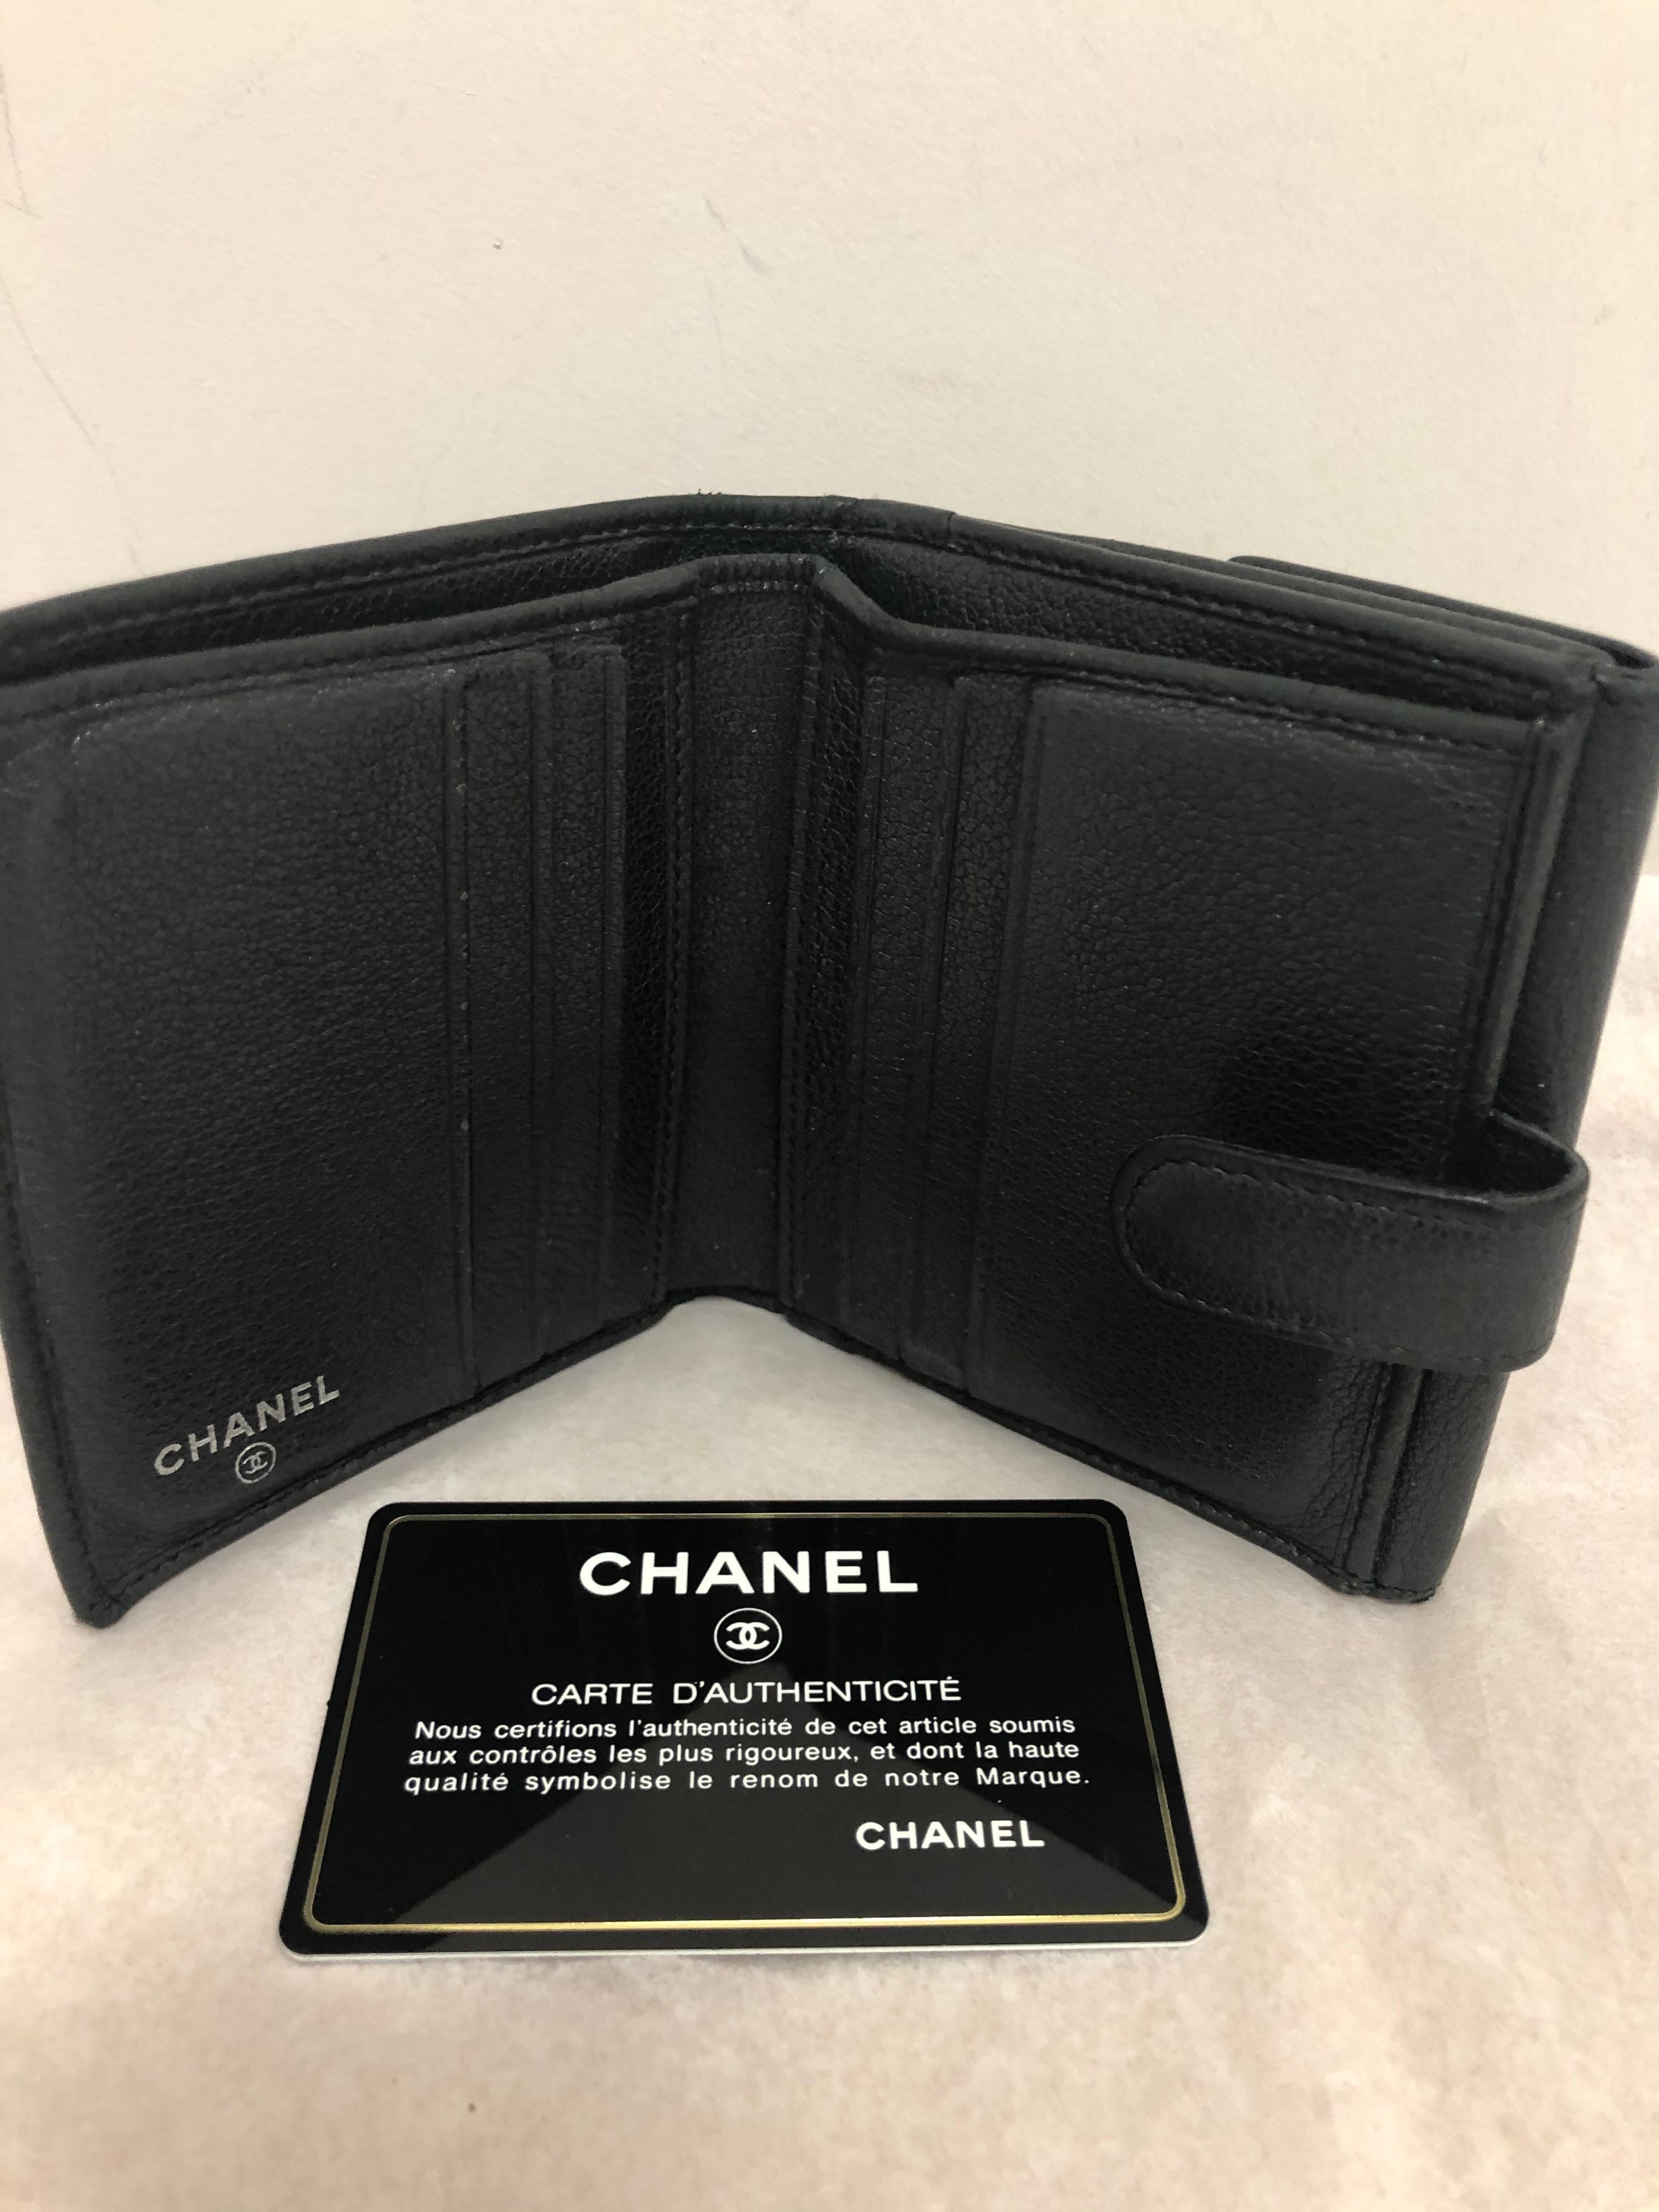 chanel certification card